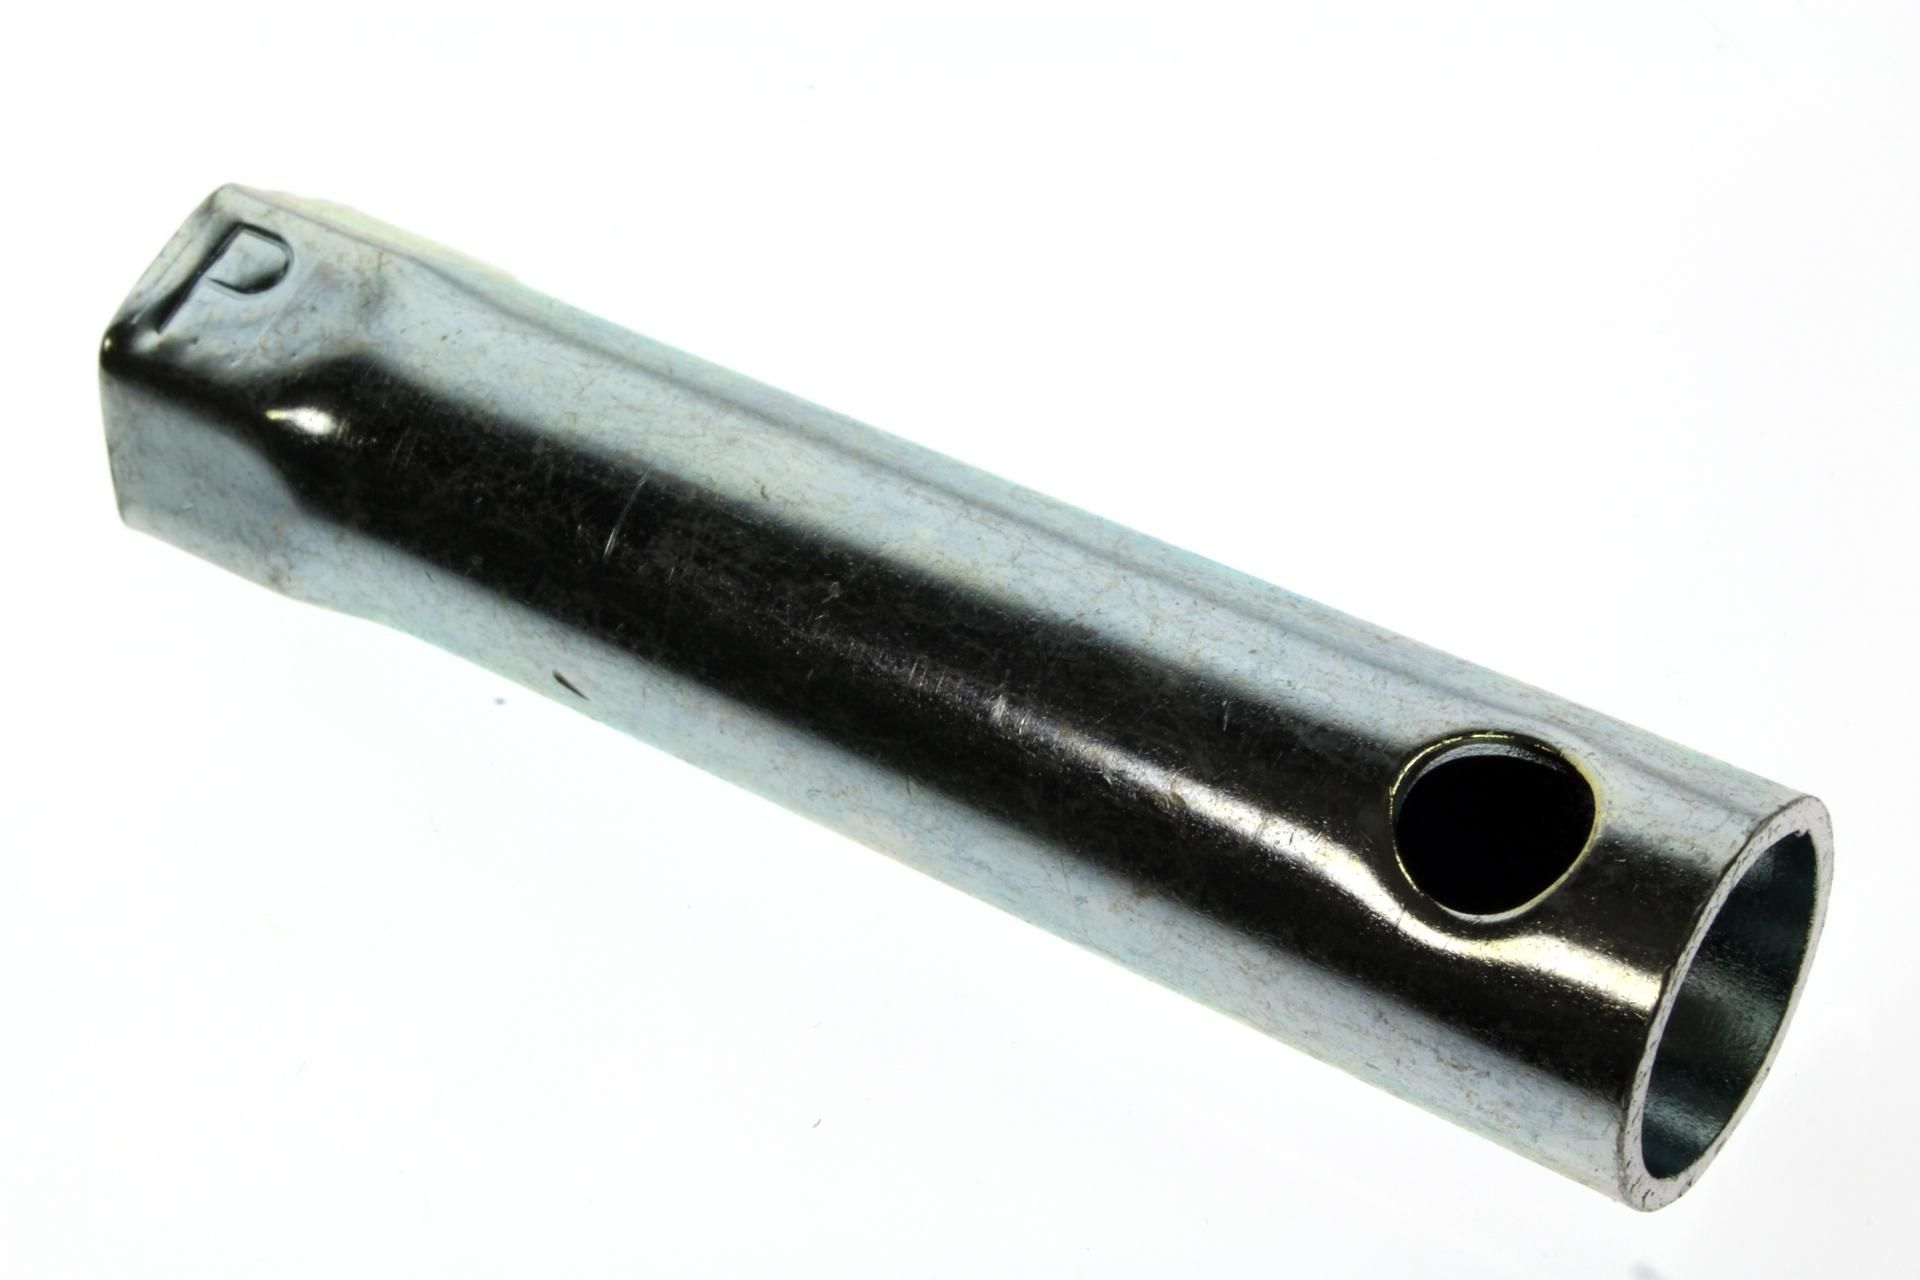 89216-MBN-670 SPARK PLUG WRENCH